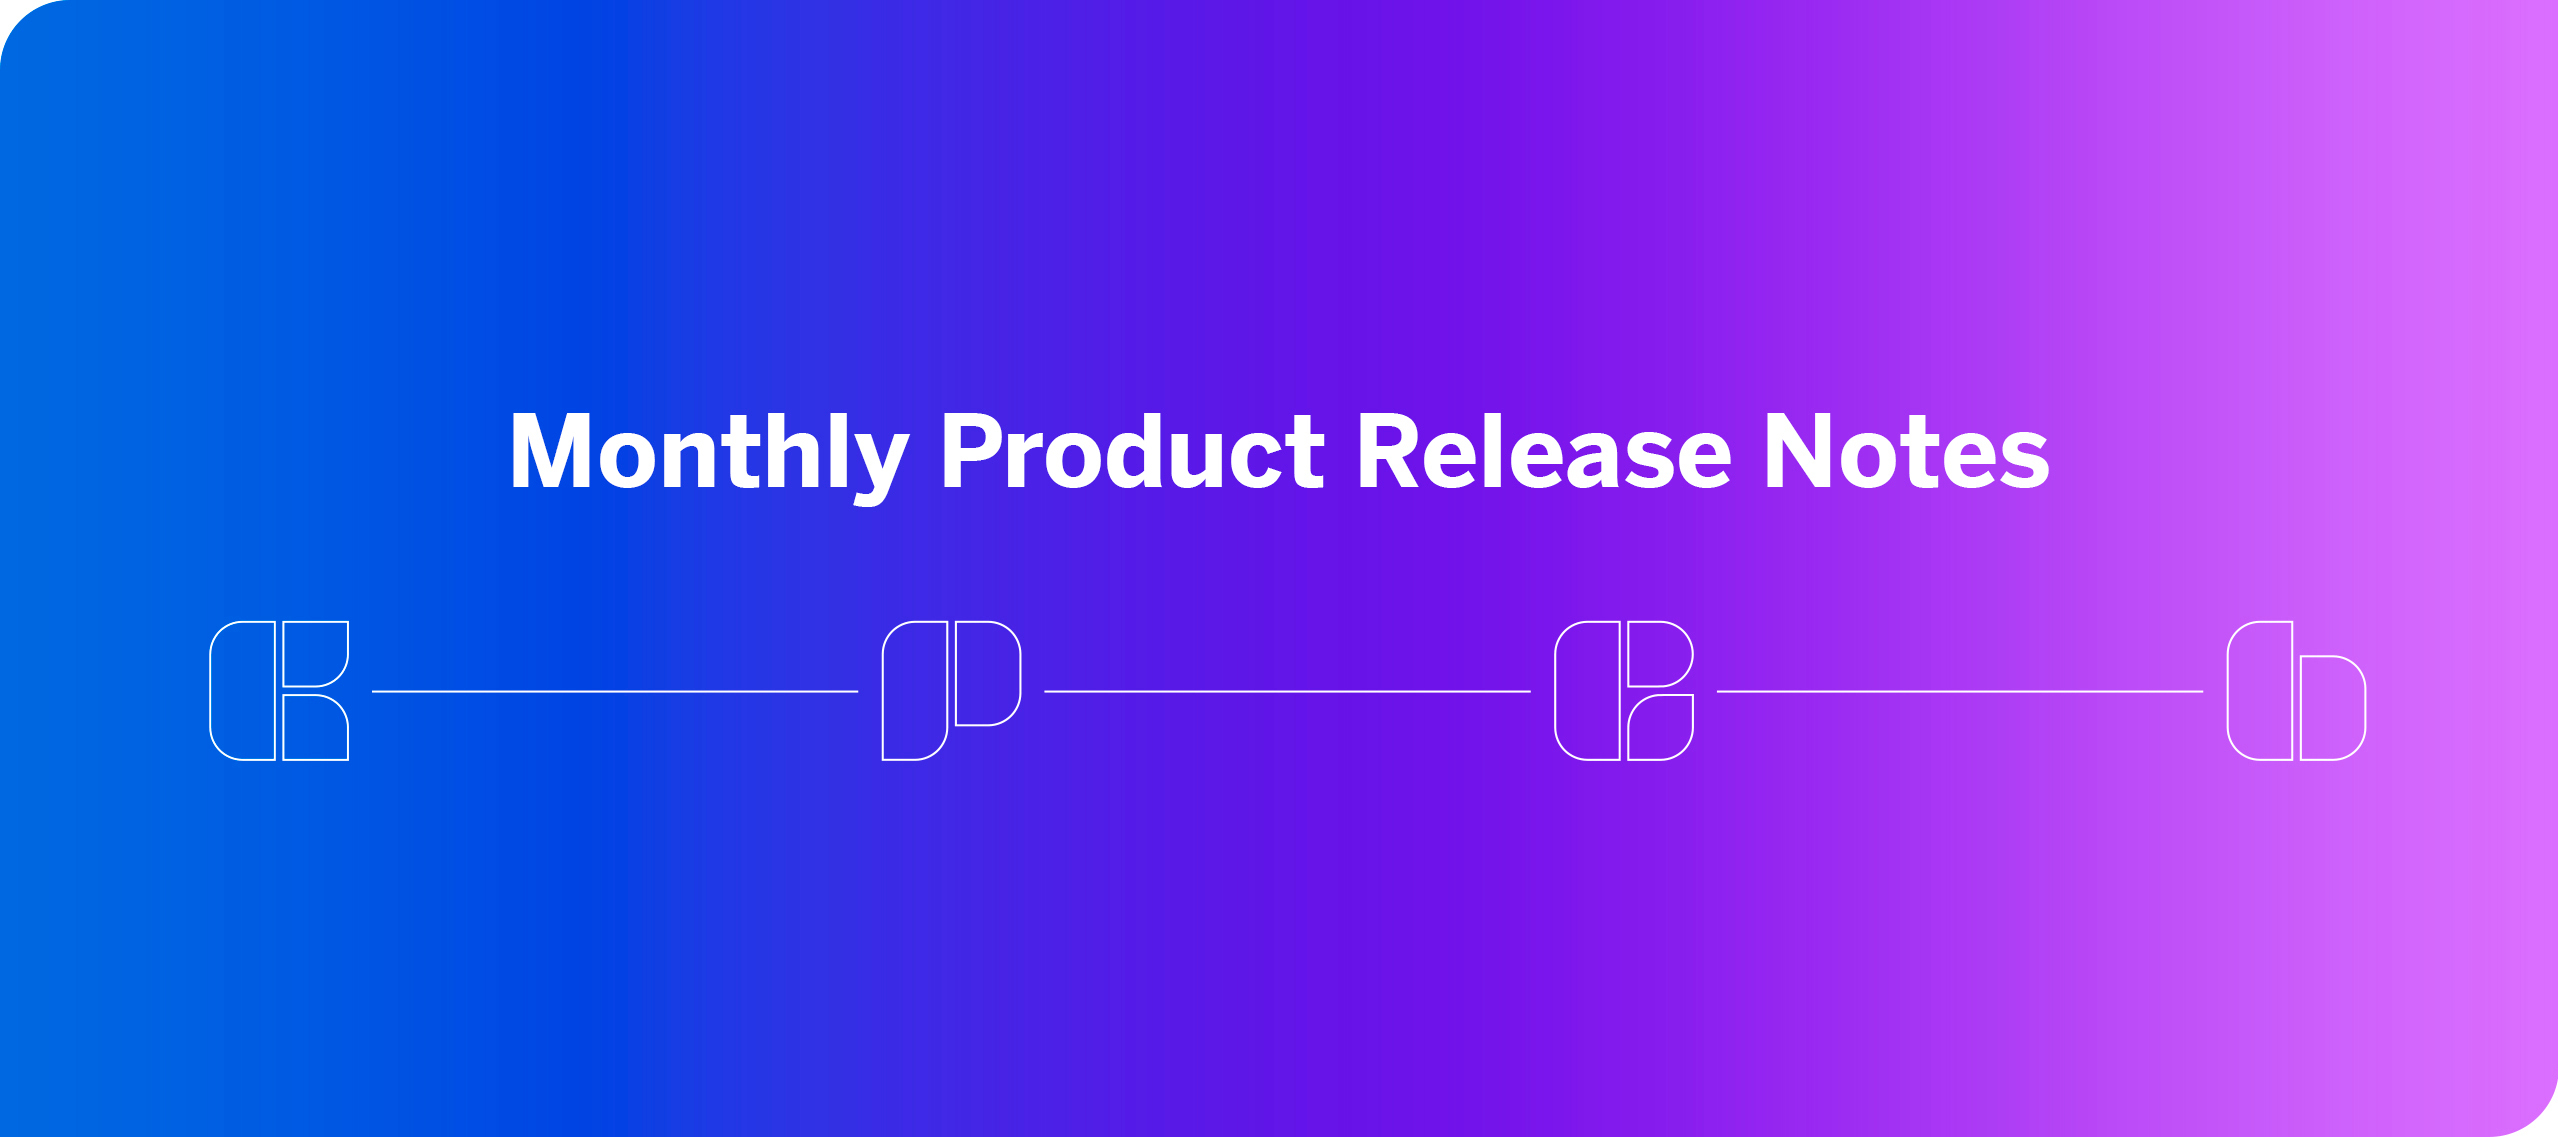 Monthly Product Release Notes - March 9, 2023 to April 5, 2023